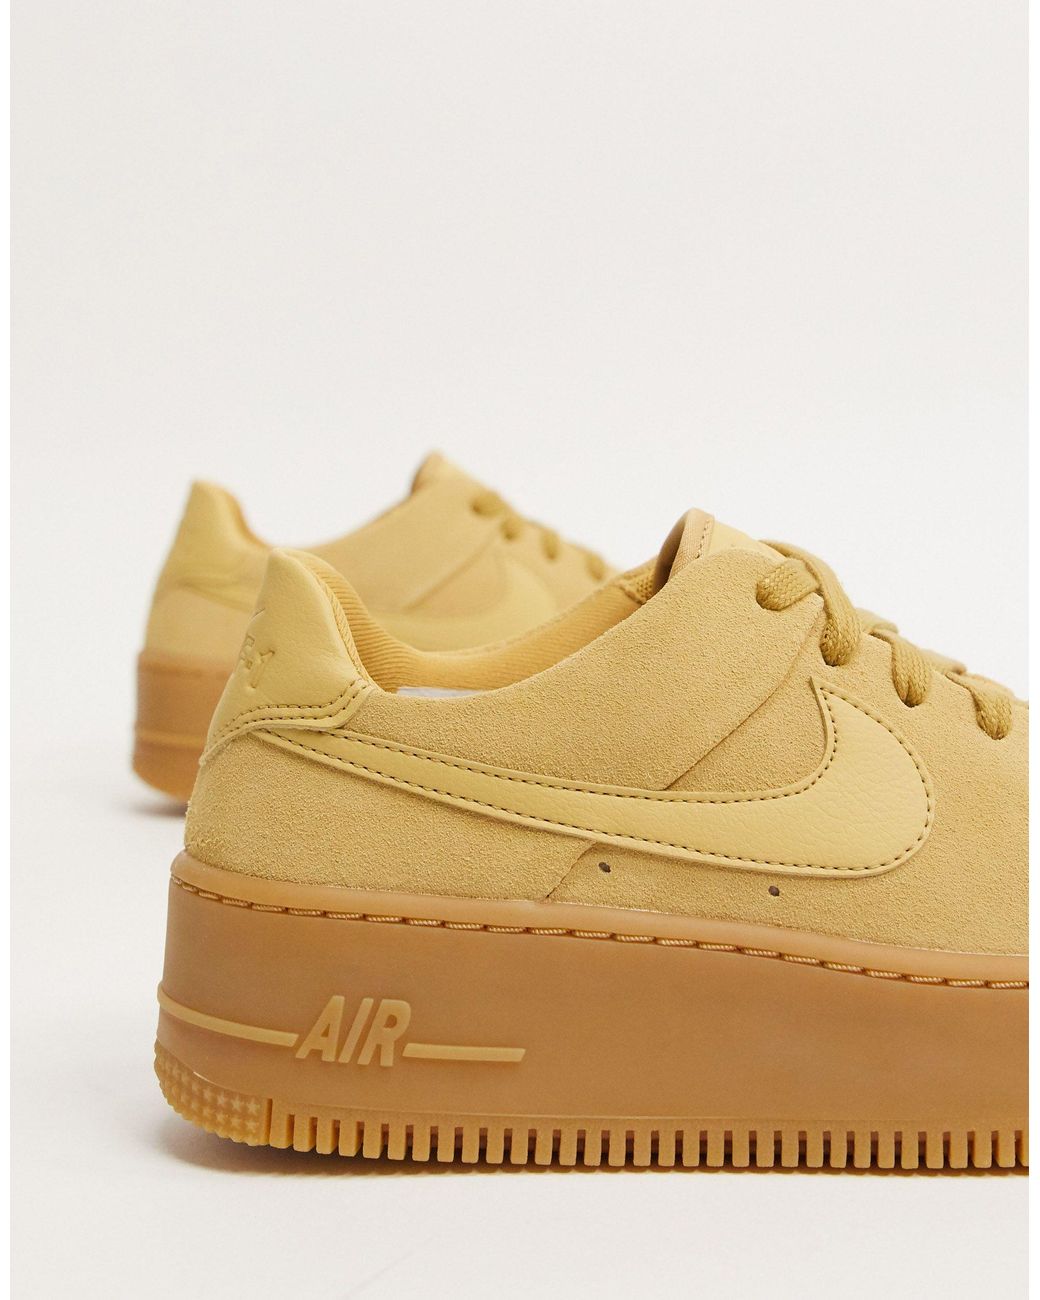 Nike Rubber Beige With Gum Sole Air Force 1 Sage Sneakers-cream in Natural  | Lyst Australia